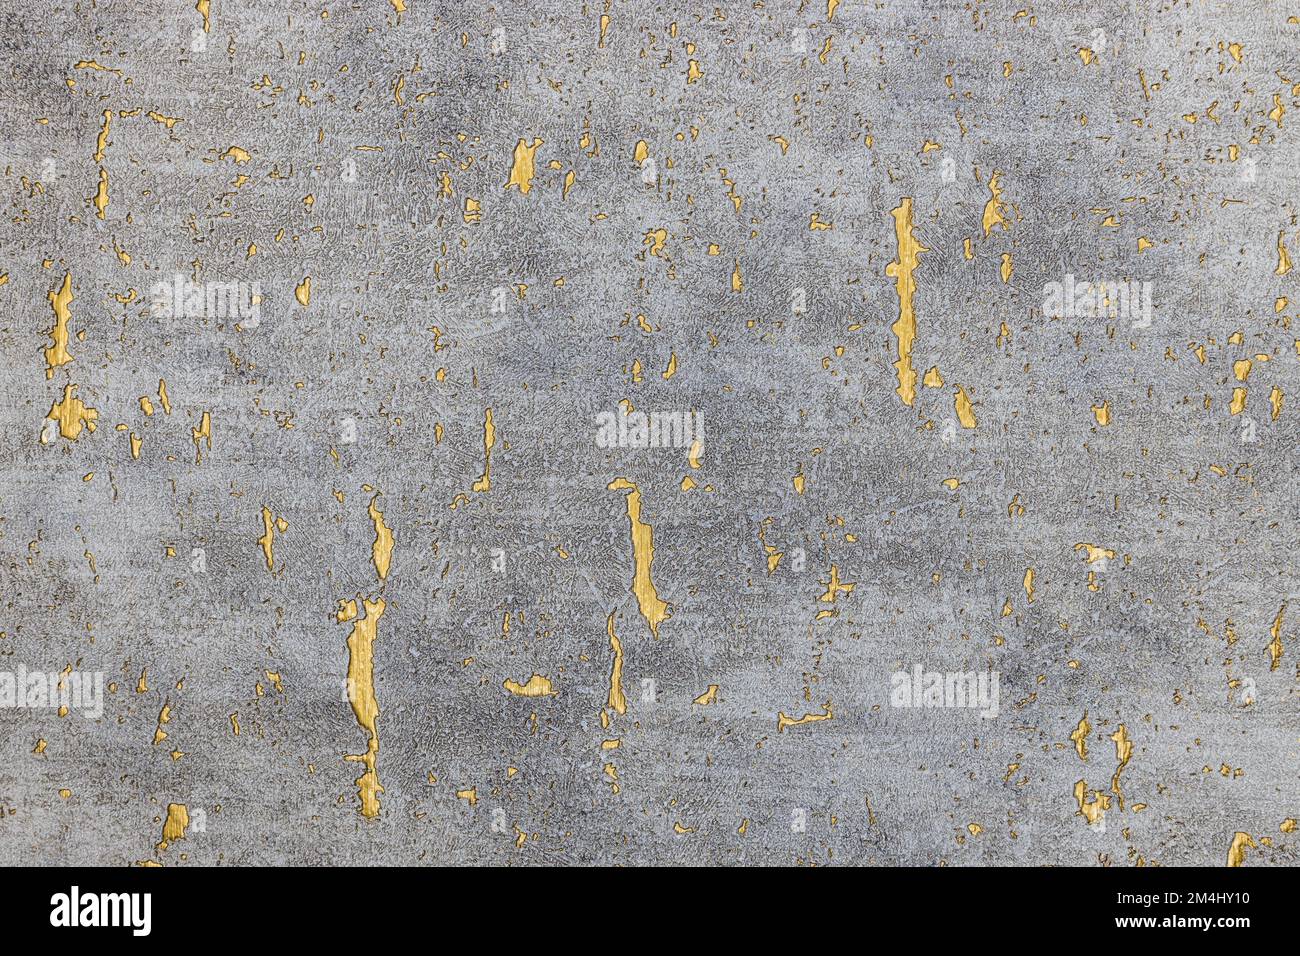 Aged wallcovering texture with various shades and golden veins Stock Photo